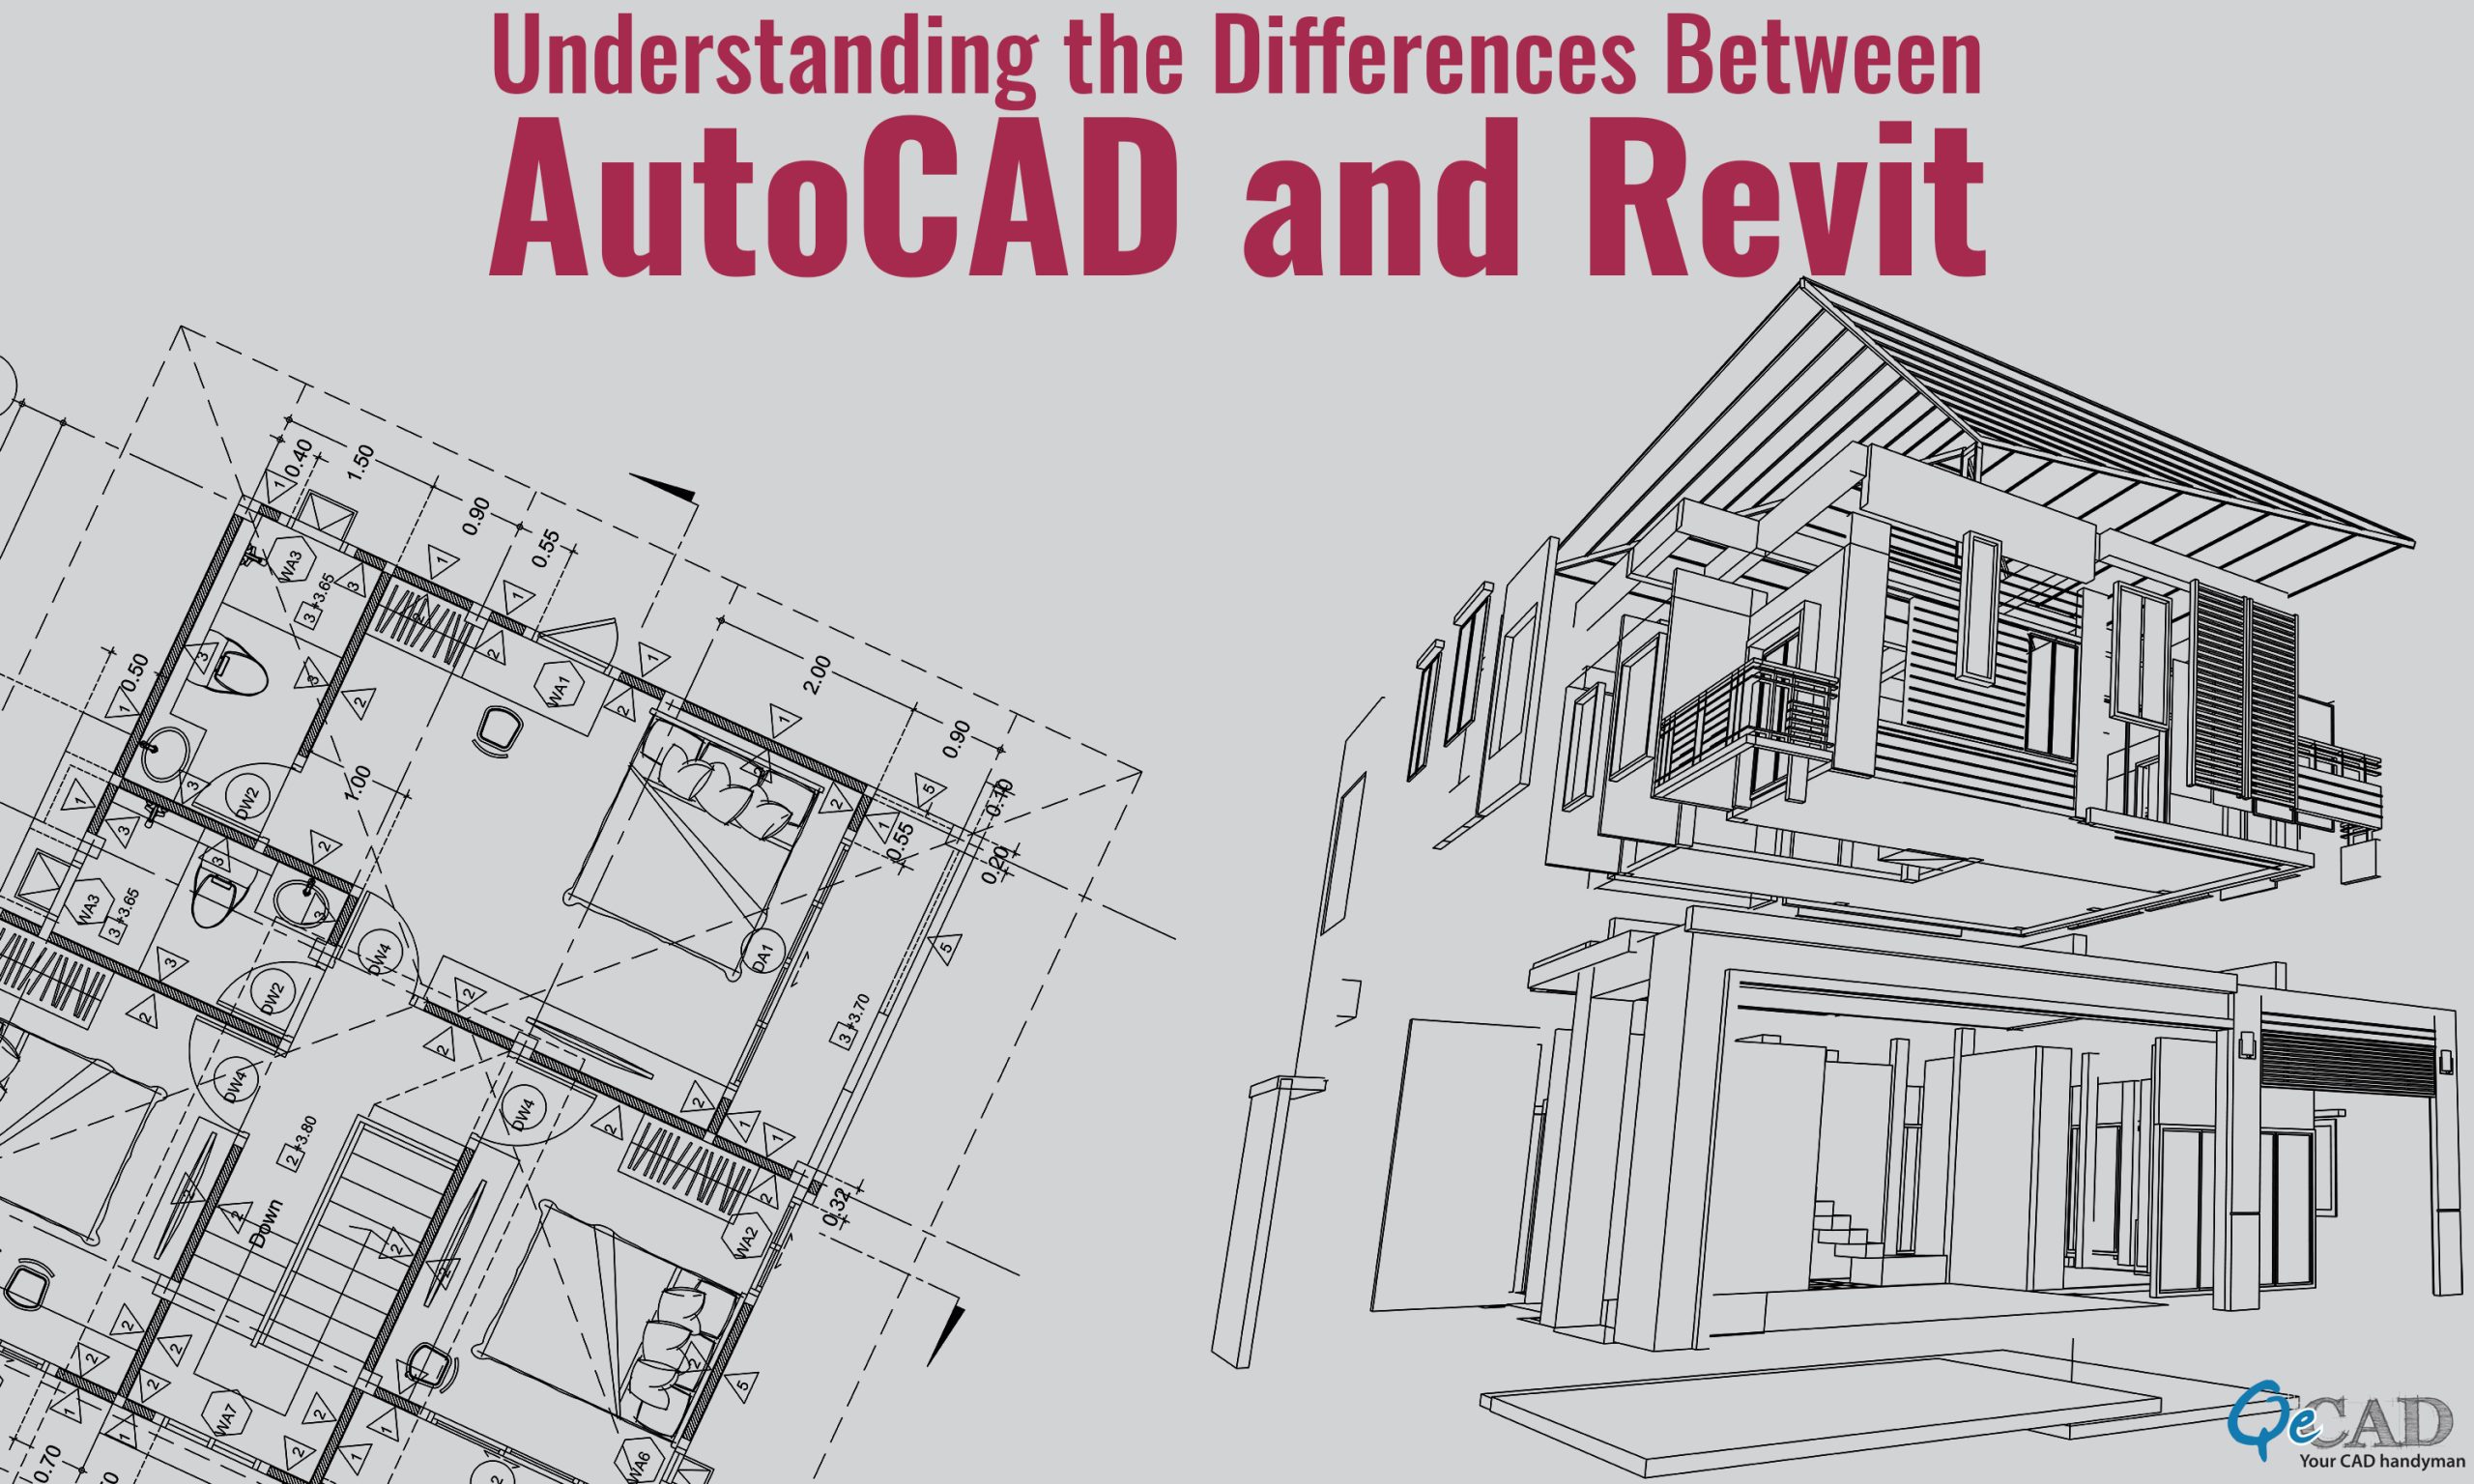 Understanding the Differences Between AutoCAD and Revit